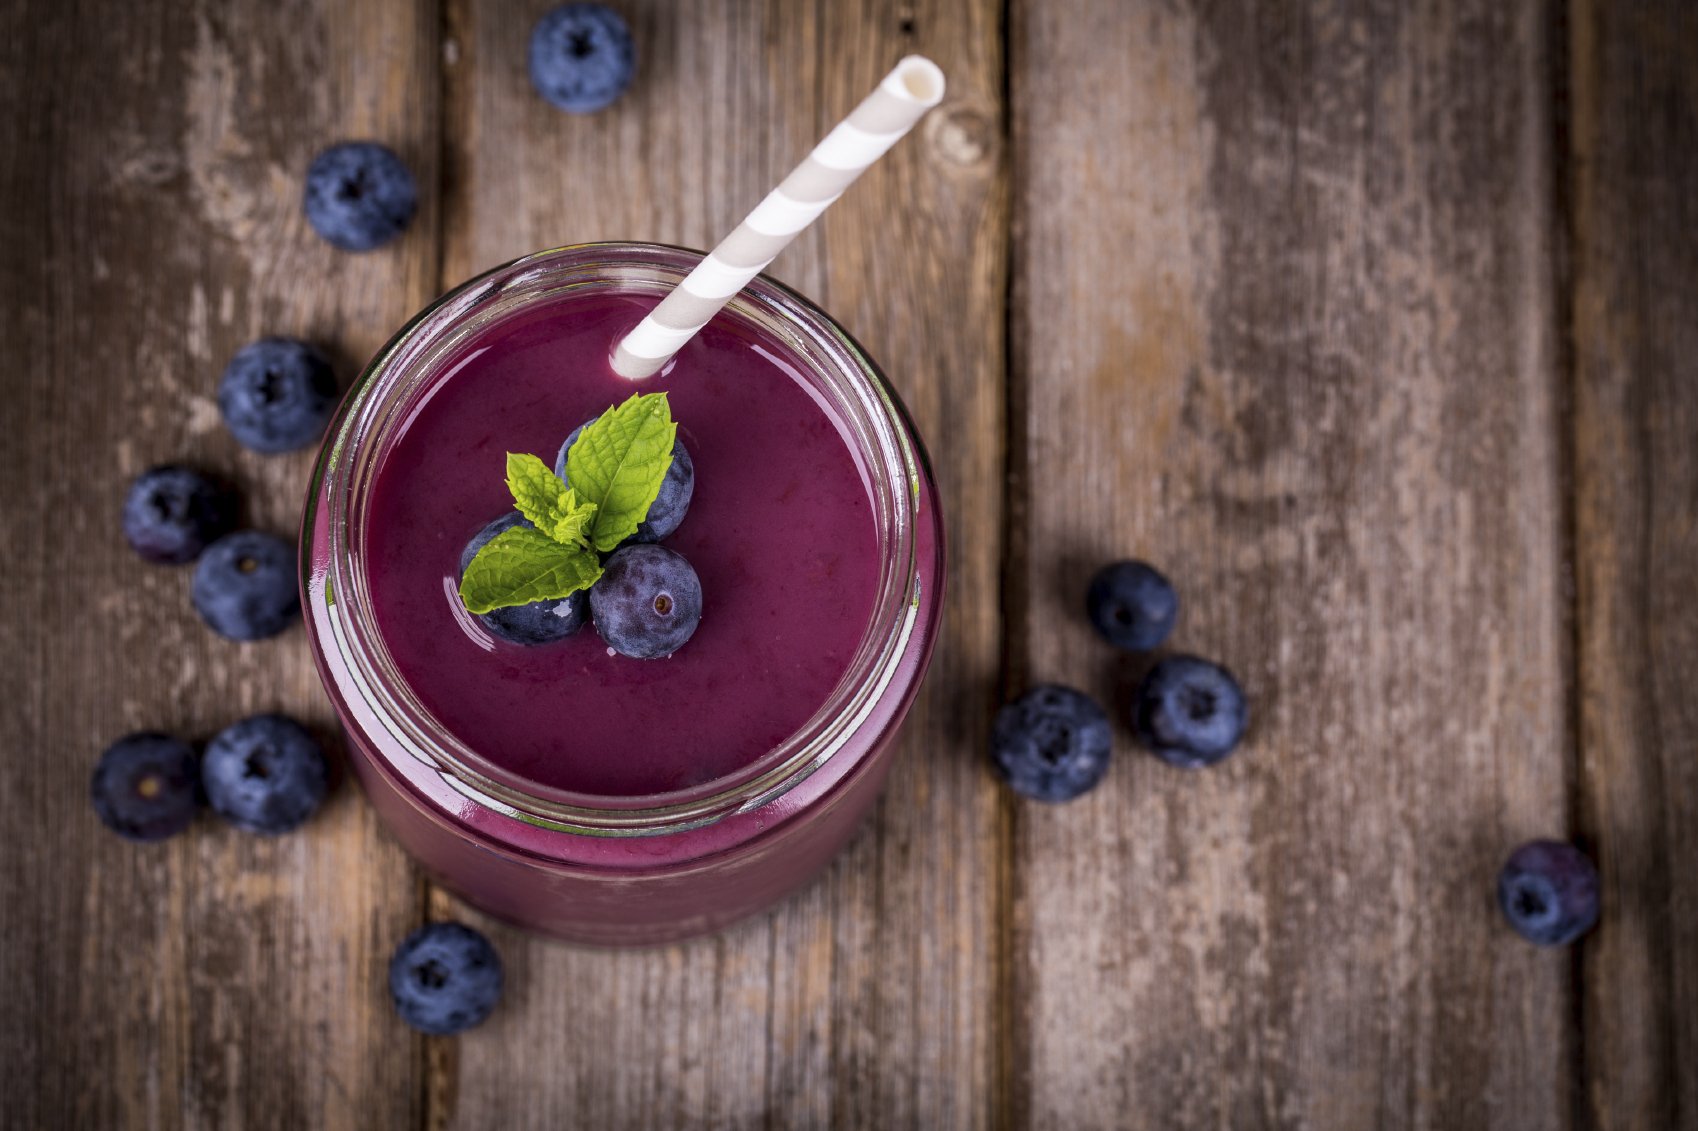 Blueberry smoothie in a glass jar with a straw and sprig of mint, over vintage wood table with fresh berries.